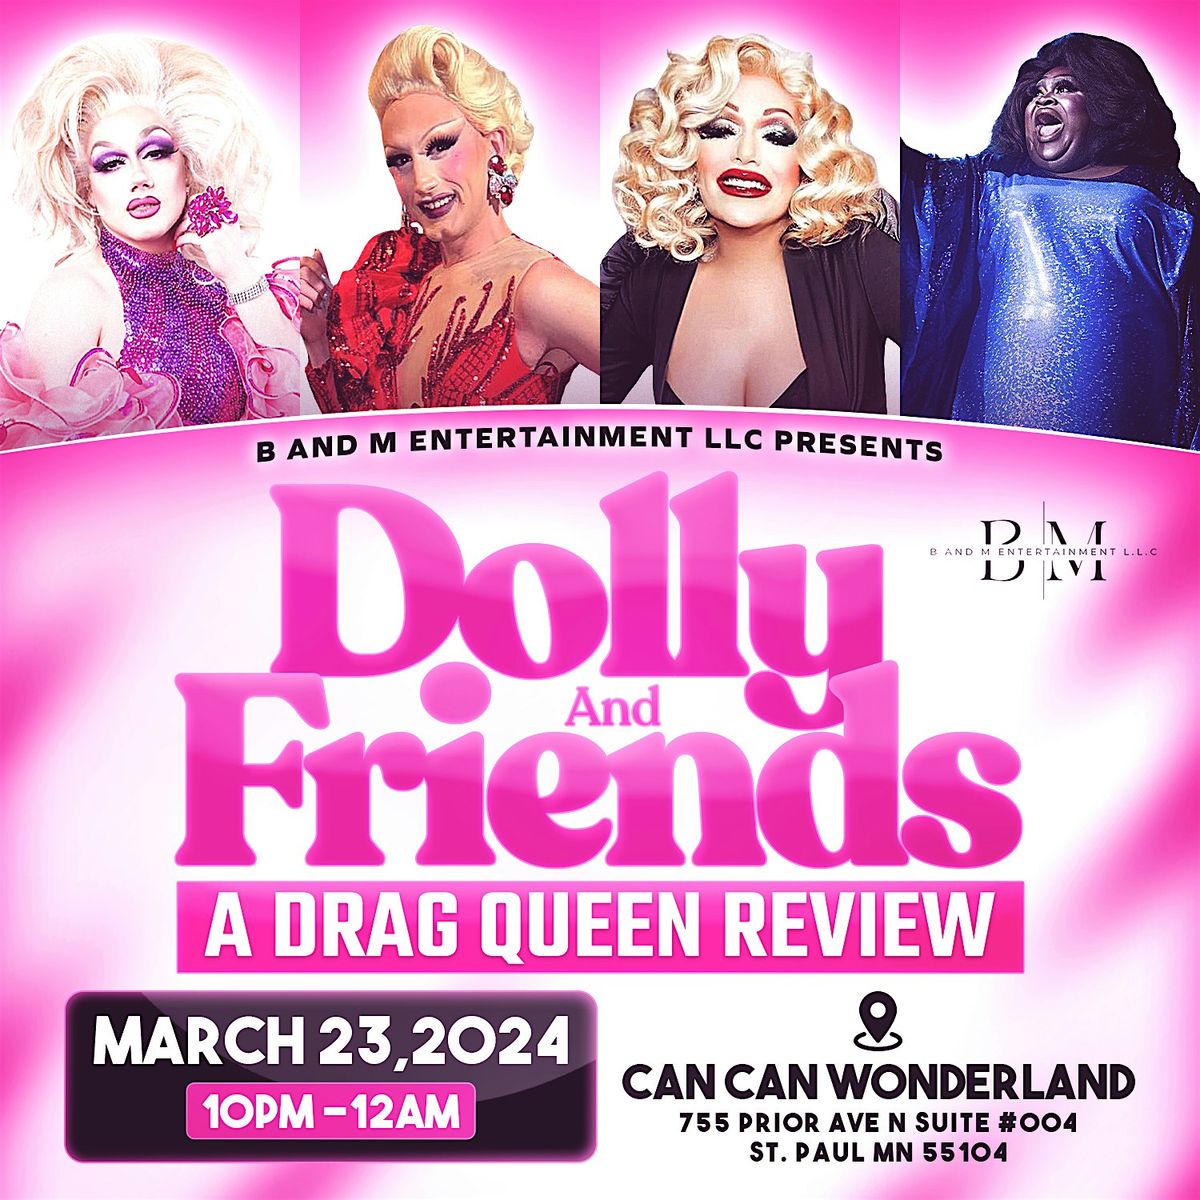 Dolly Parton And Friends Drag Review